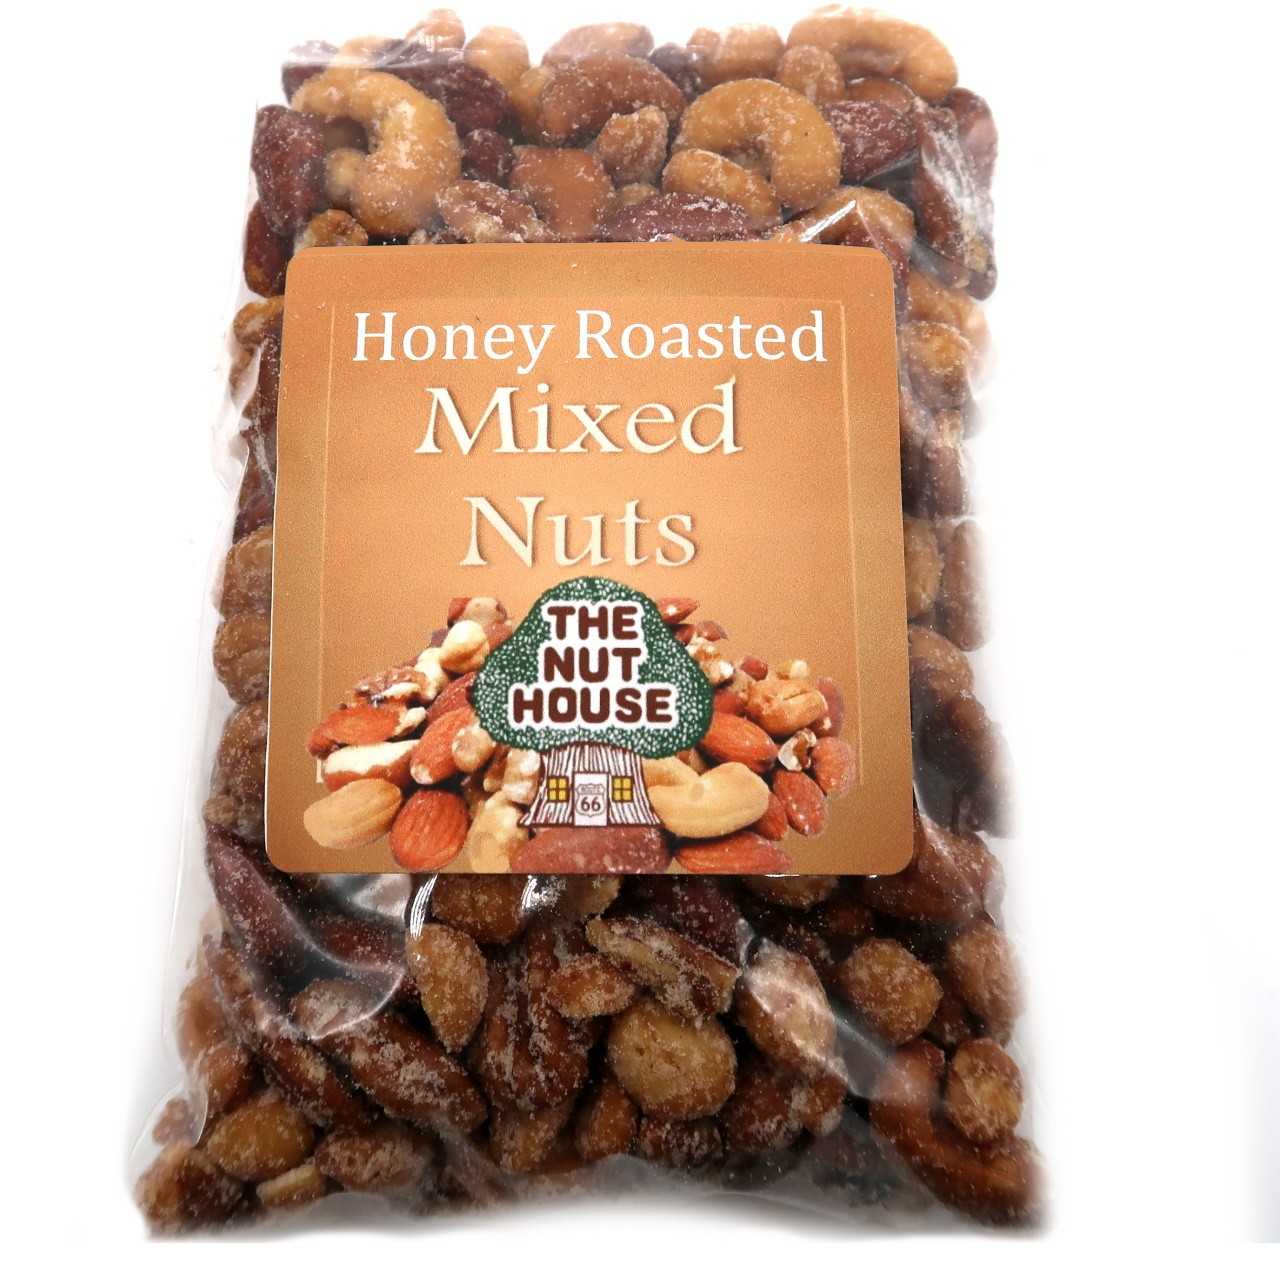 https://cdn11.bigcommerce.com/s-36vh87glm0/images/stencil/original/products/17178/37469/The-Nut-House-Honey-Roasted-Mixed-Nuts-10-oz_26429__98241.1696975323.jpg?c=1